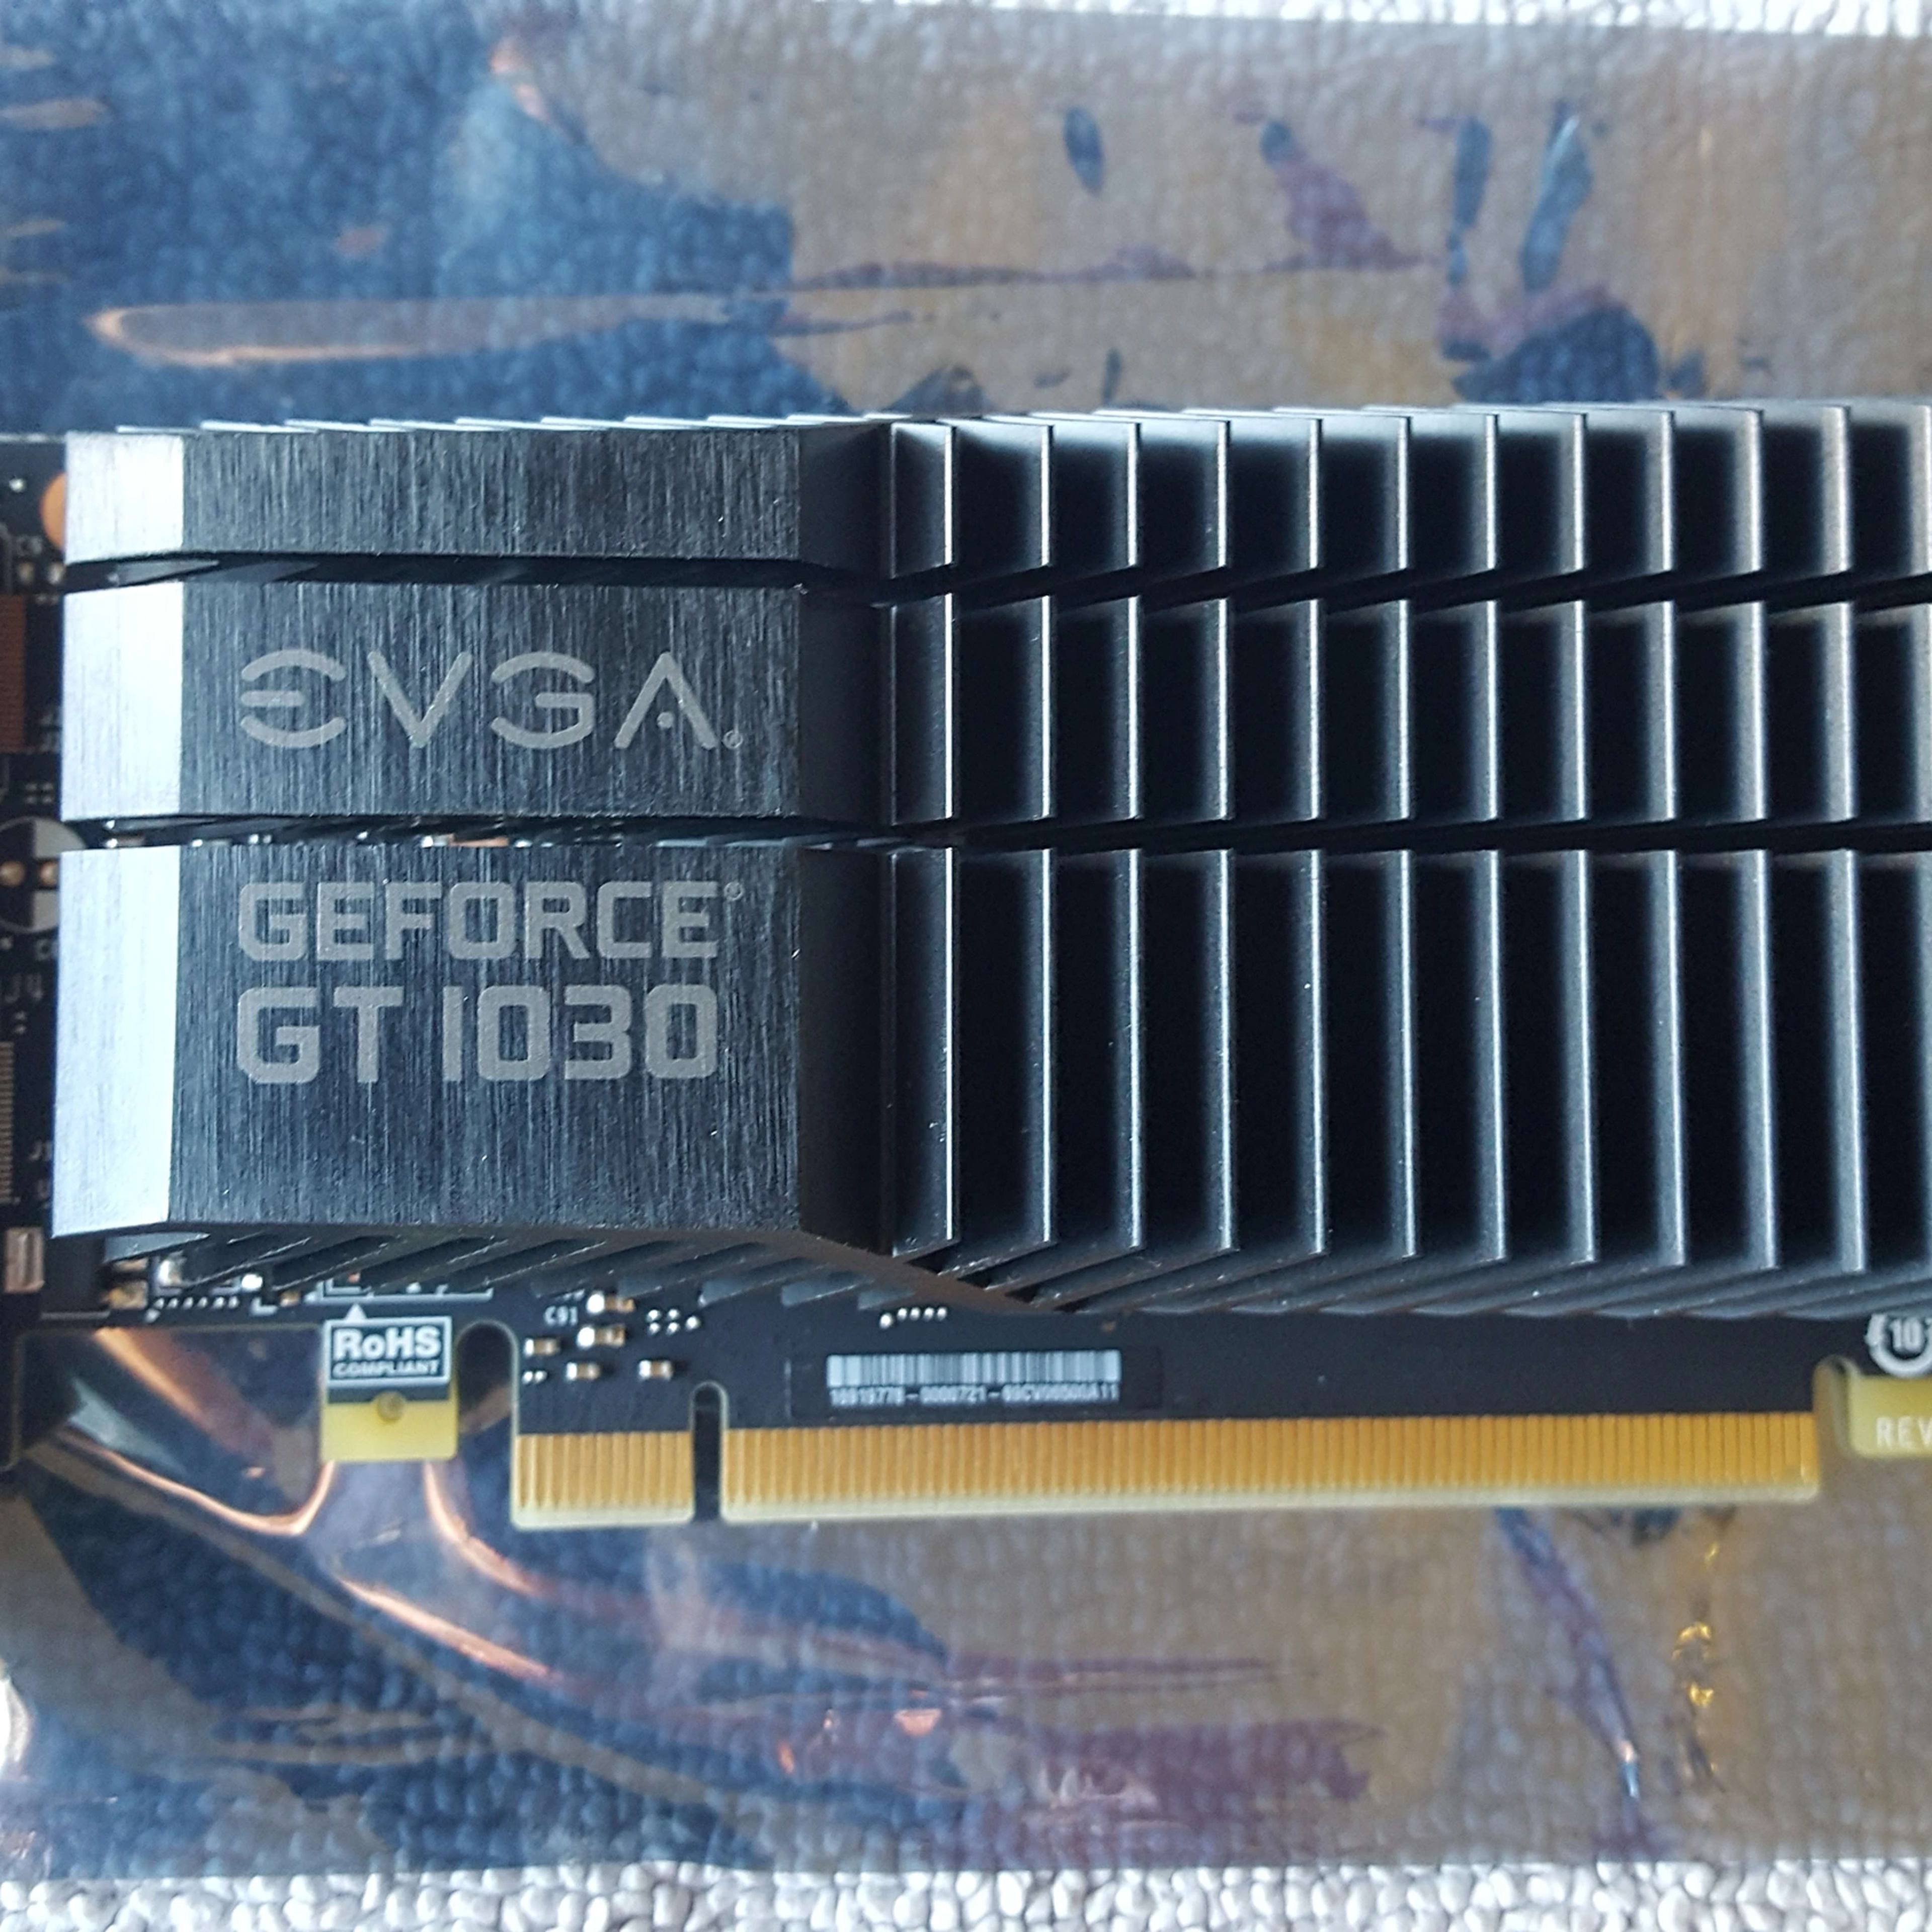 EVGA Geforce GT 1030 2GB GDDR5 - low profile & full height brackets included, used - like new